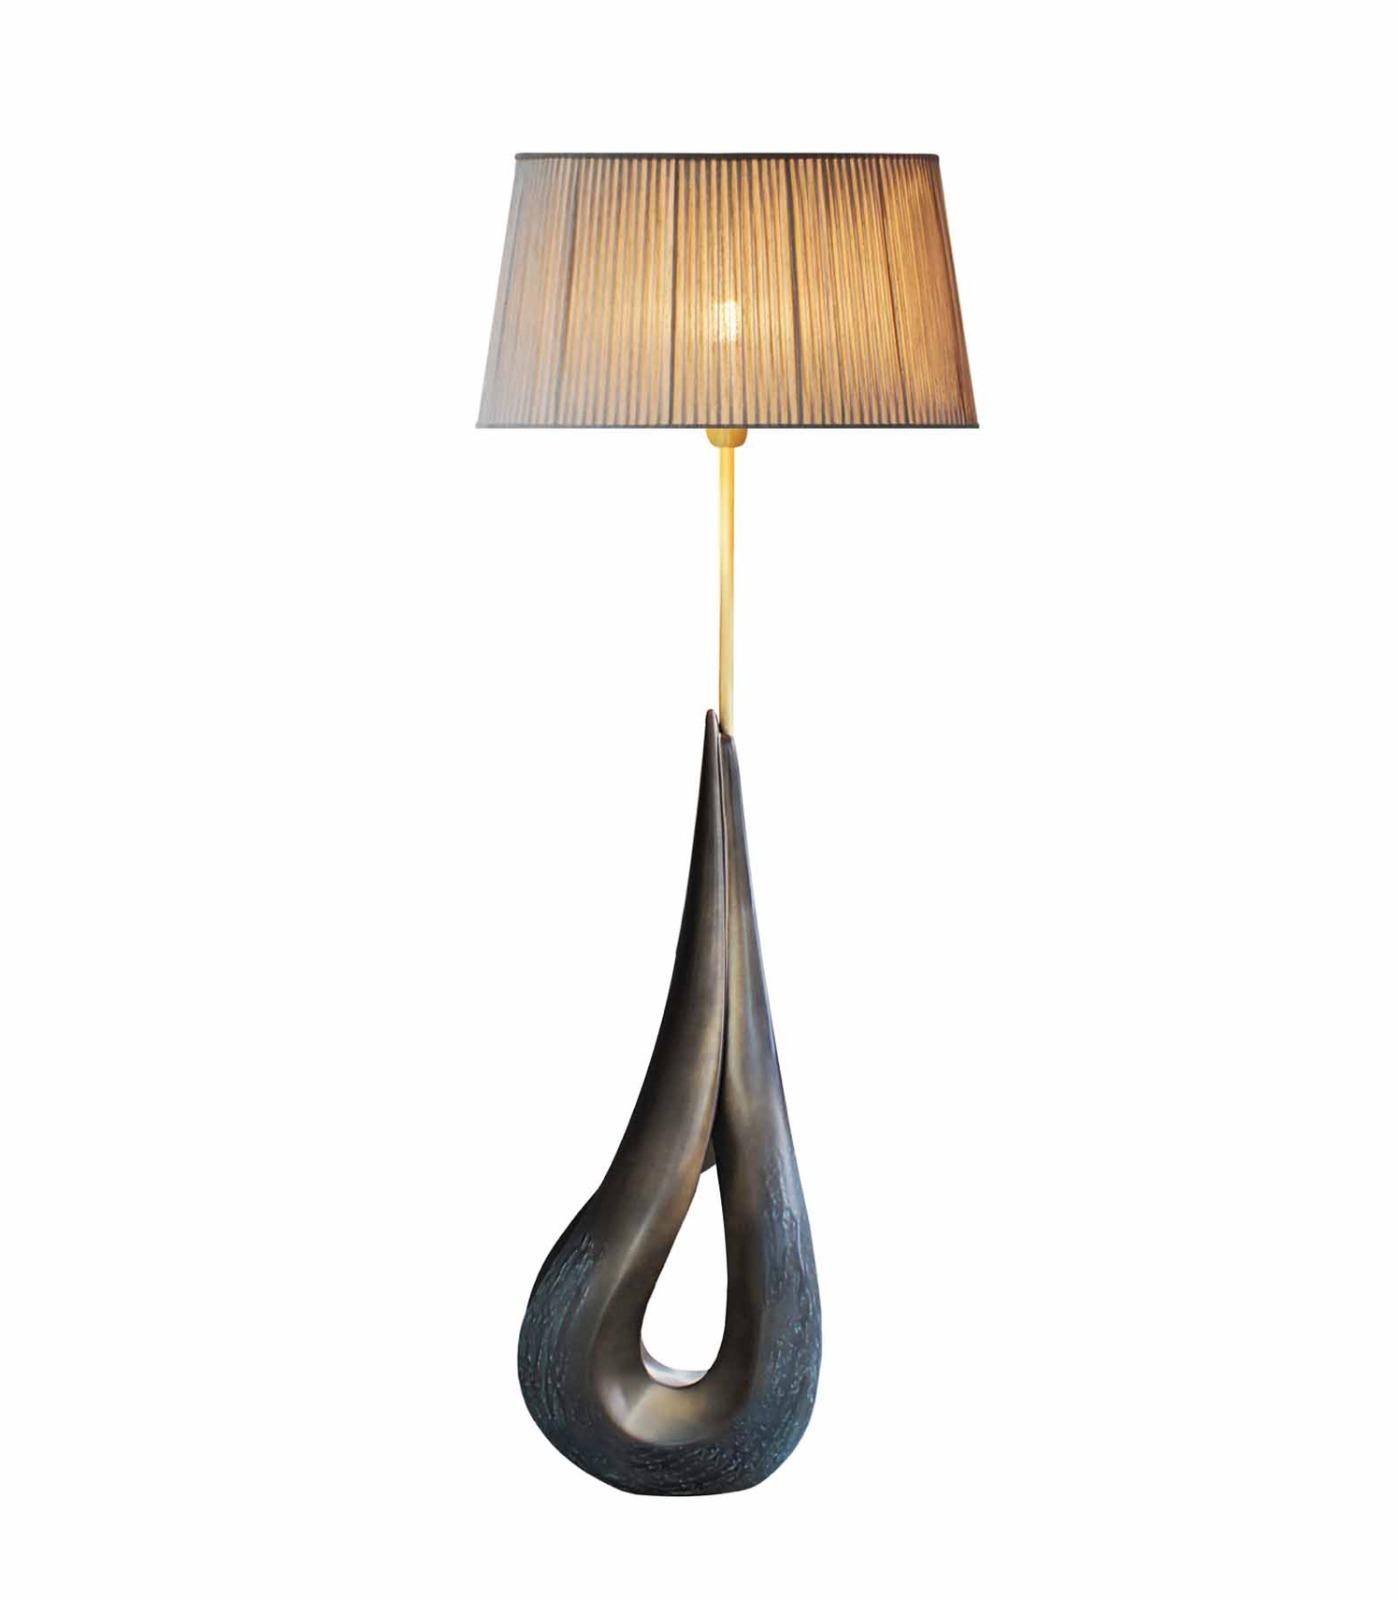 Floor lamp.

General information
Dimensions (cm): Ø60 x 161
Dimensions (in): Ø23.6 x 63.4
Weight (kg): 8
Weight (lbs): 17.6.

Materials and Colors
Lampshade: Pleated fabric Vitória ref. 